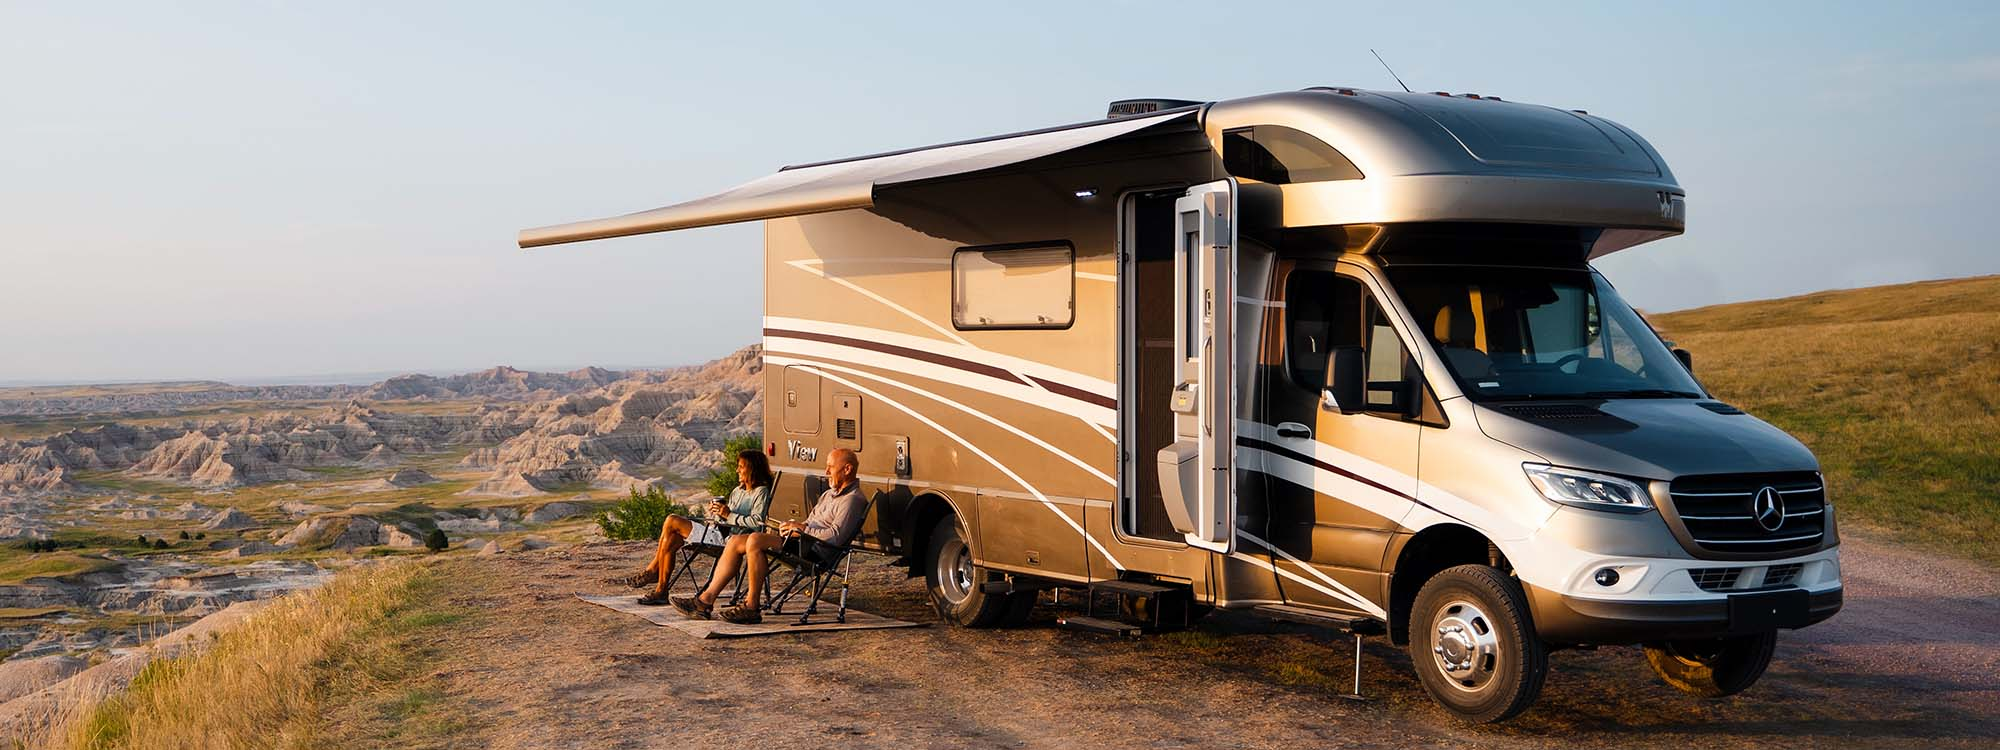 Couple lounging outside their View motorhome